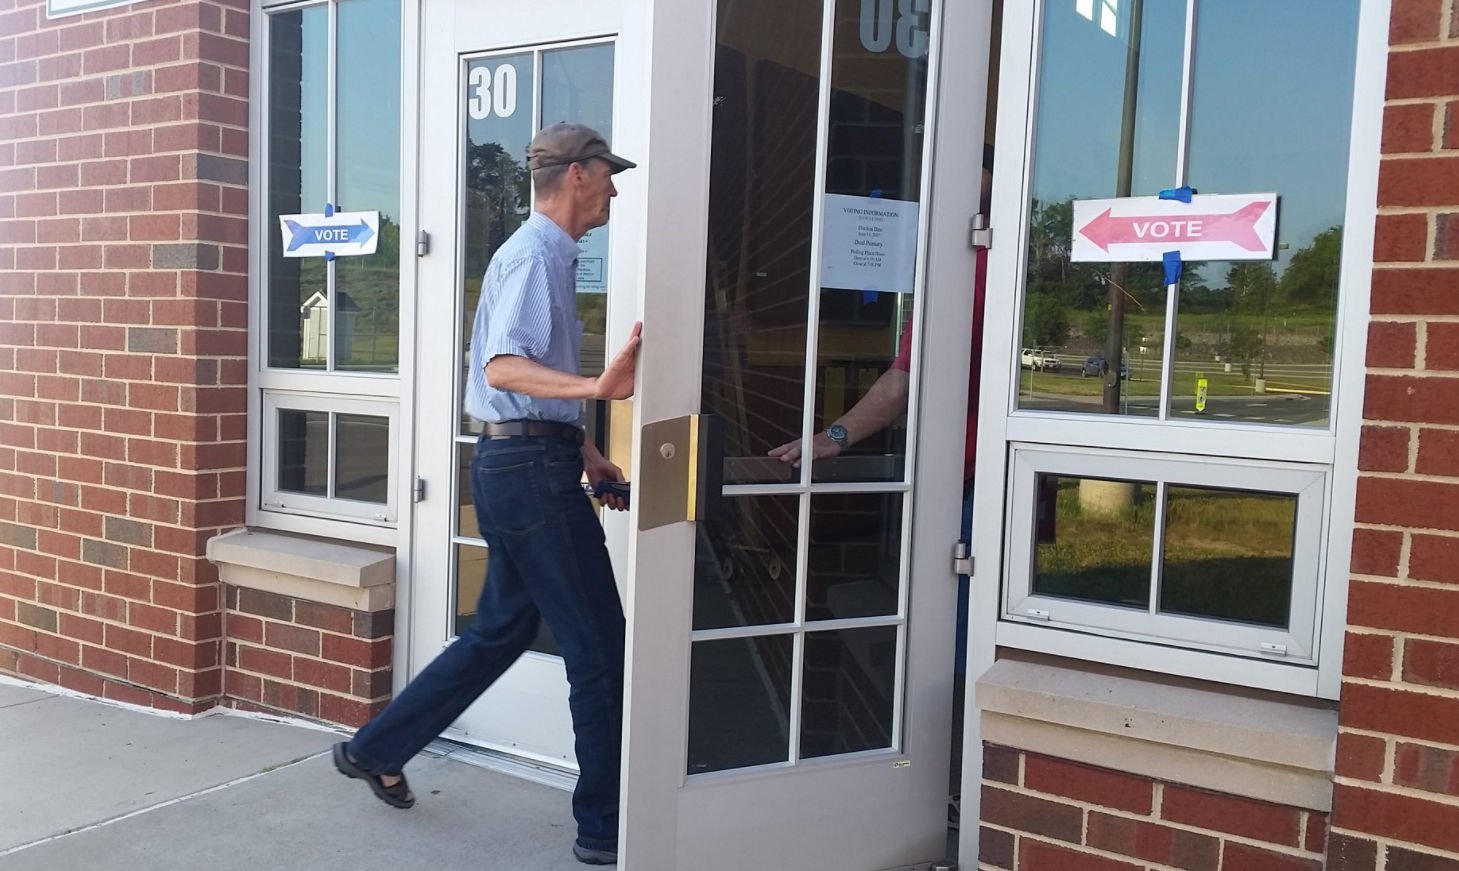 Pictured is a man opening a door to a voting facility in Virginia